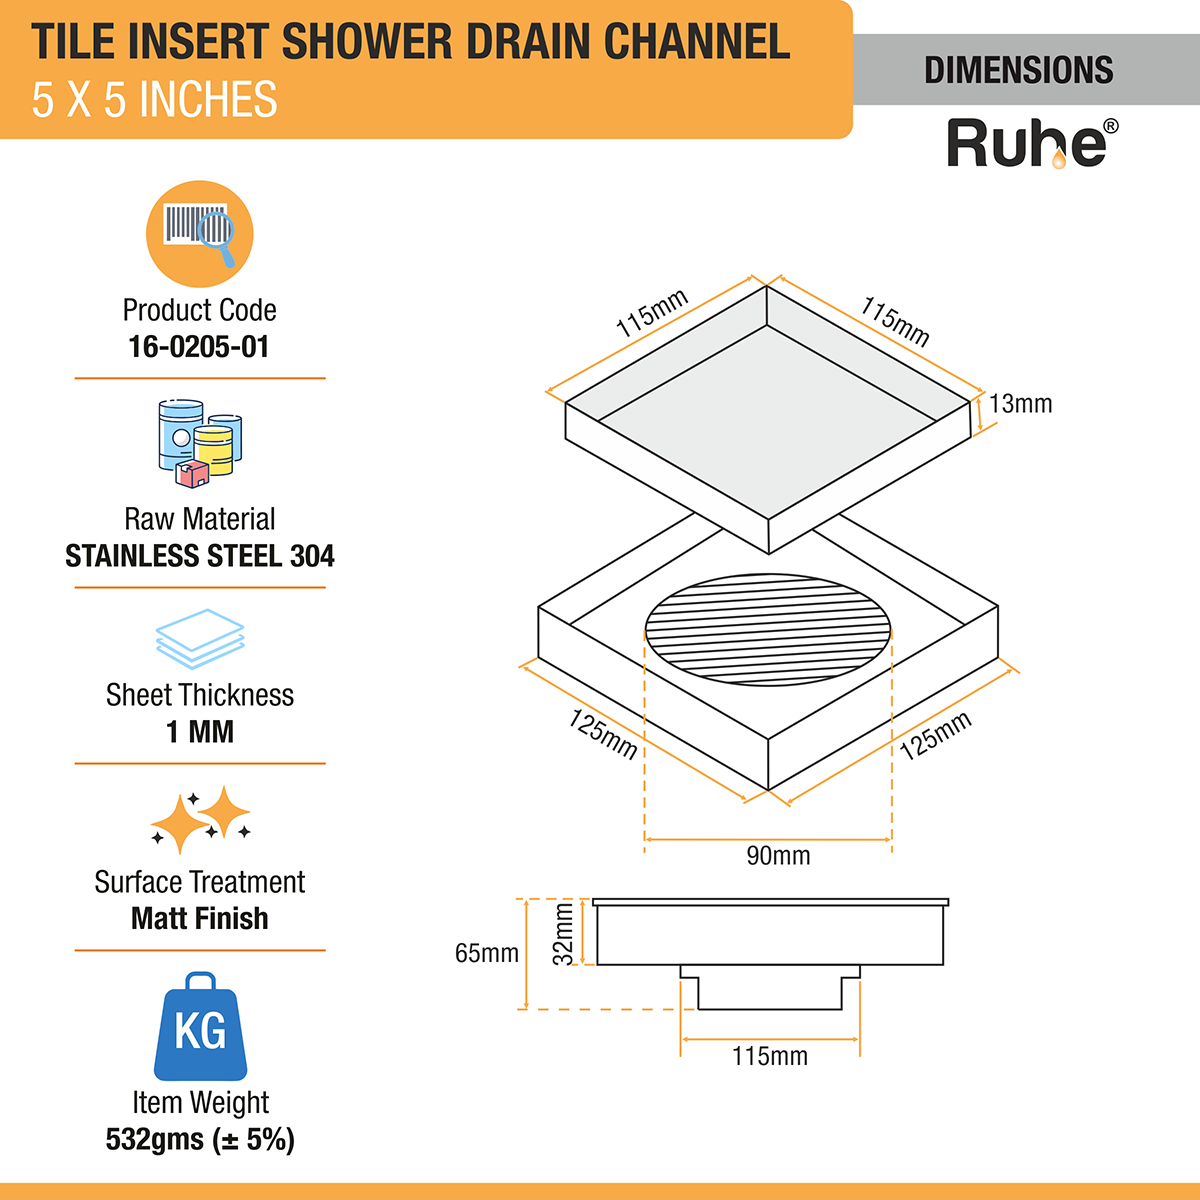 Tile Insert Shower Drain Channel (5 x 5 Inches) with Cockroach Trap (304 Grade) dimensions and size